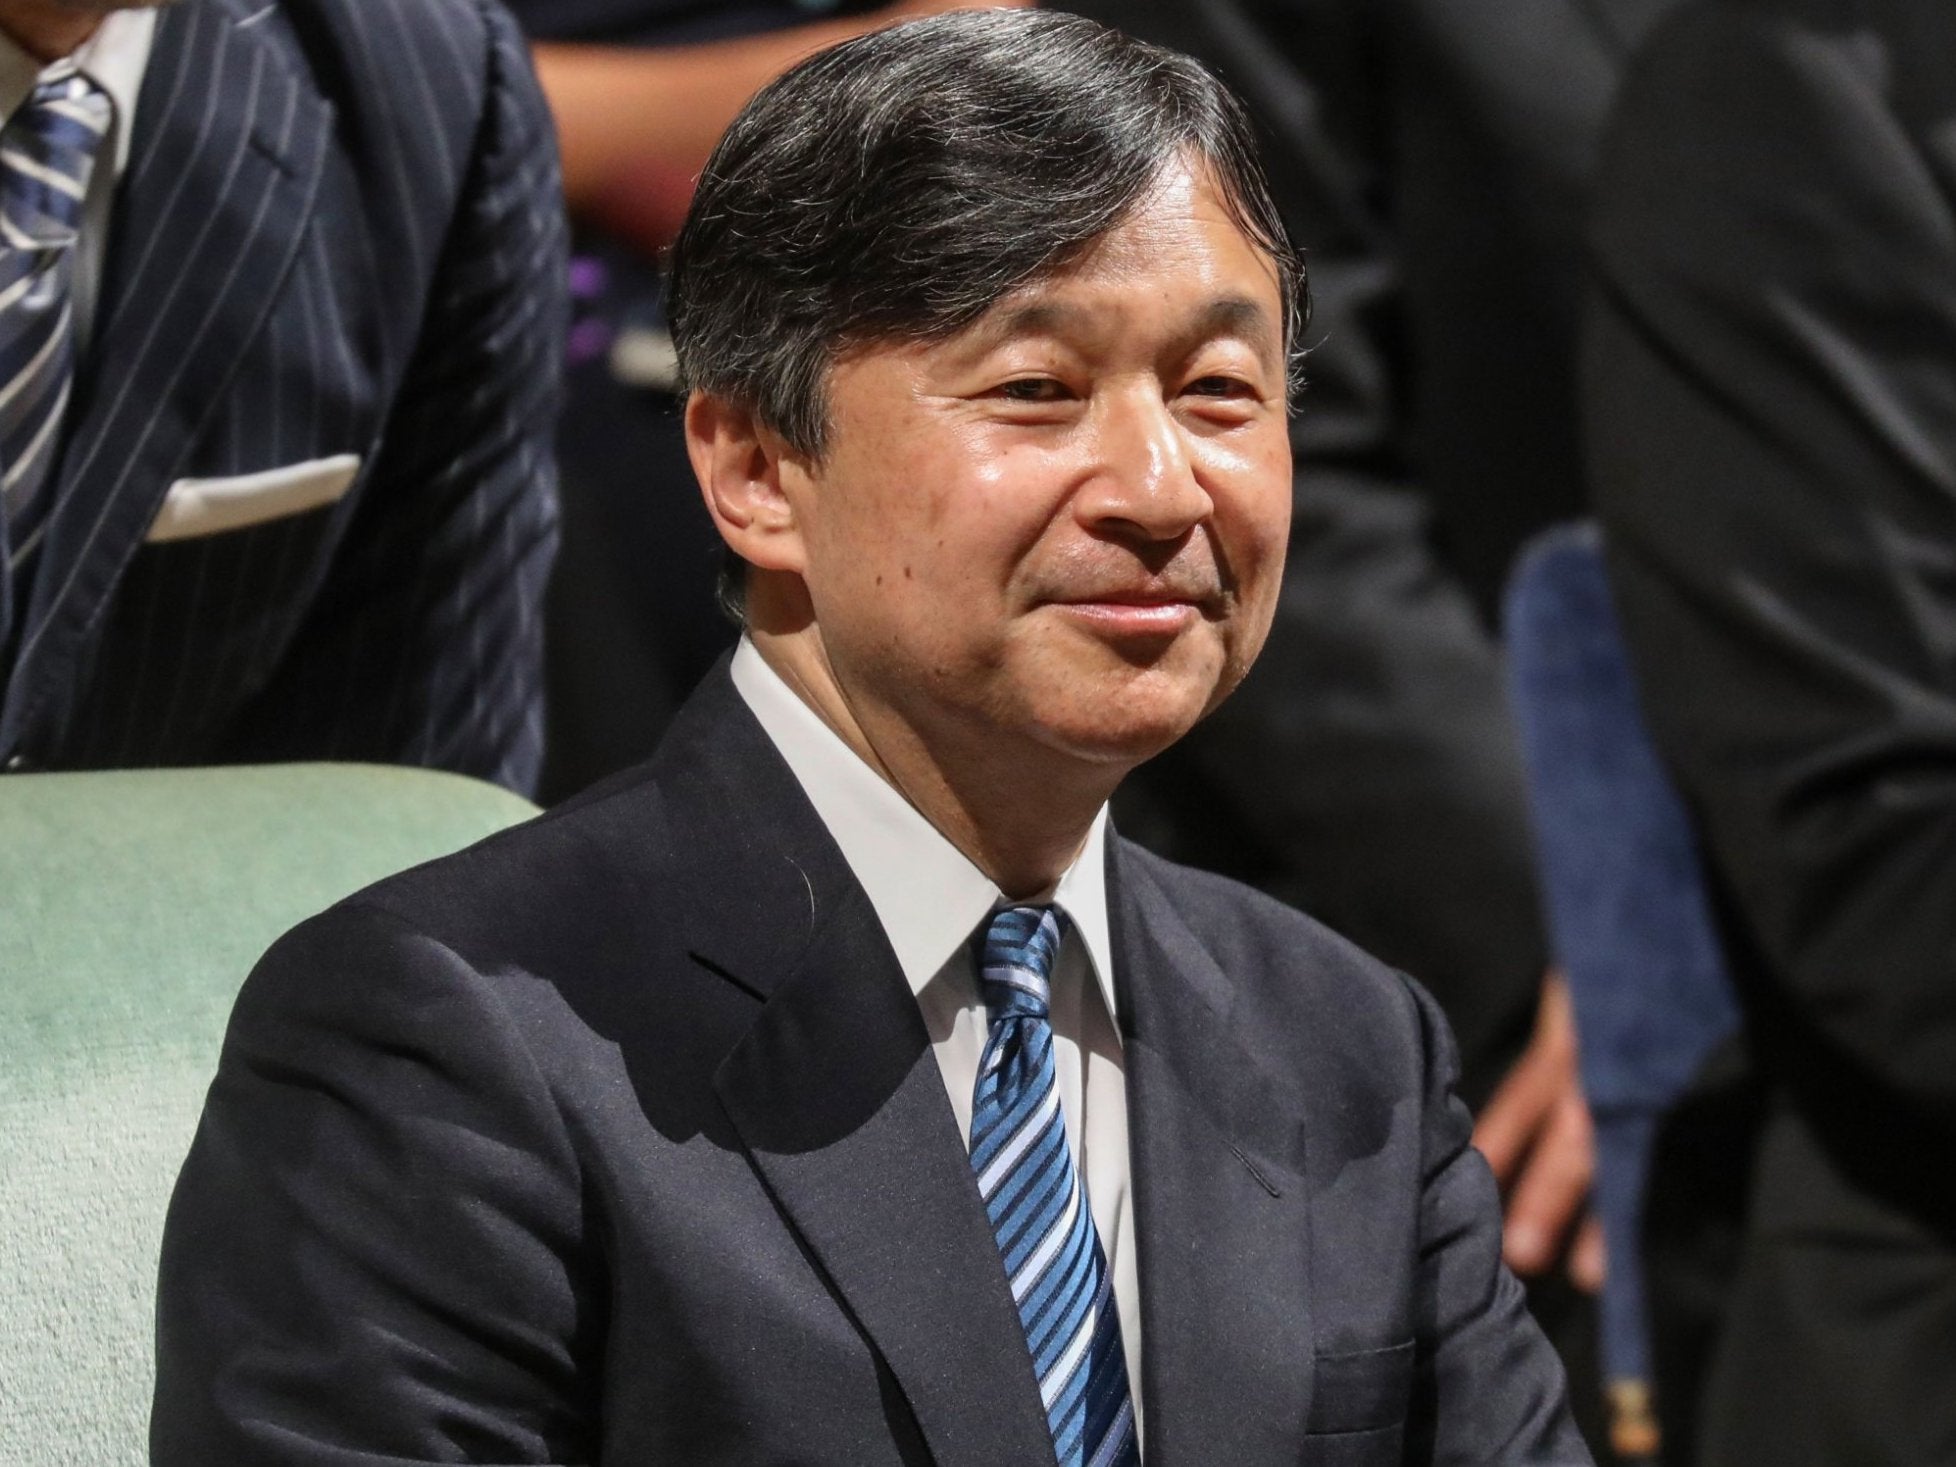 The break is to celebrate the ascension of emperor-in-waiting Naruhito